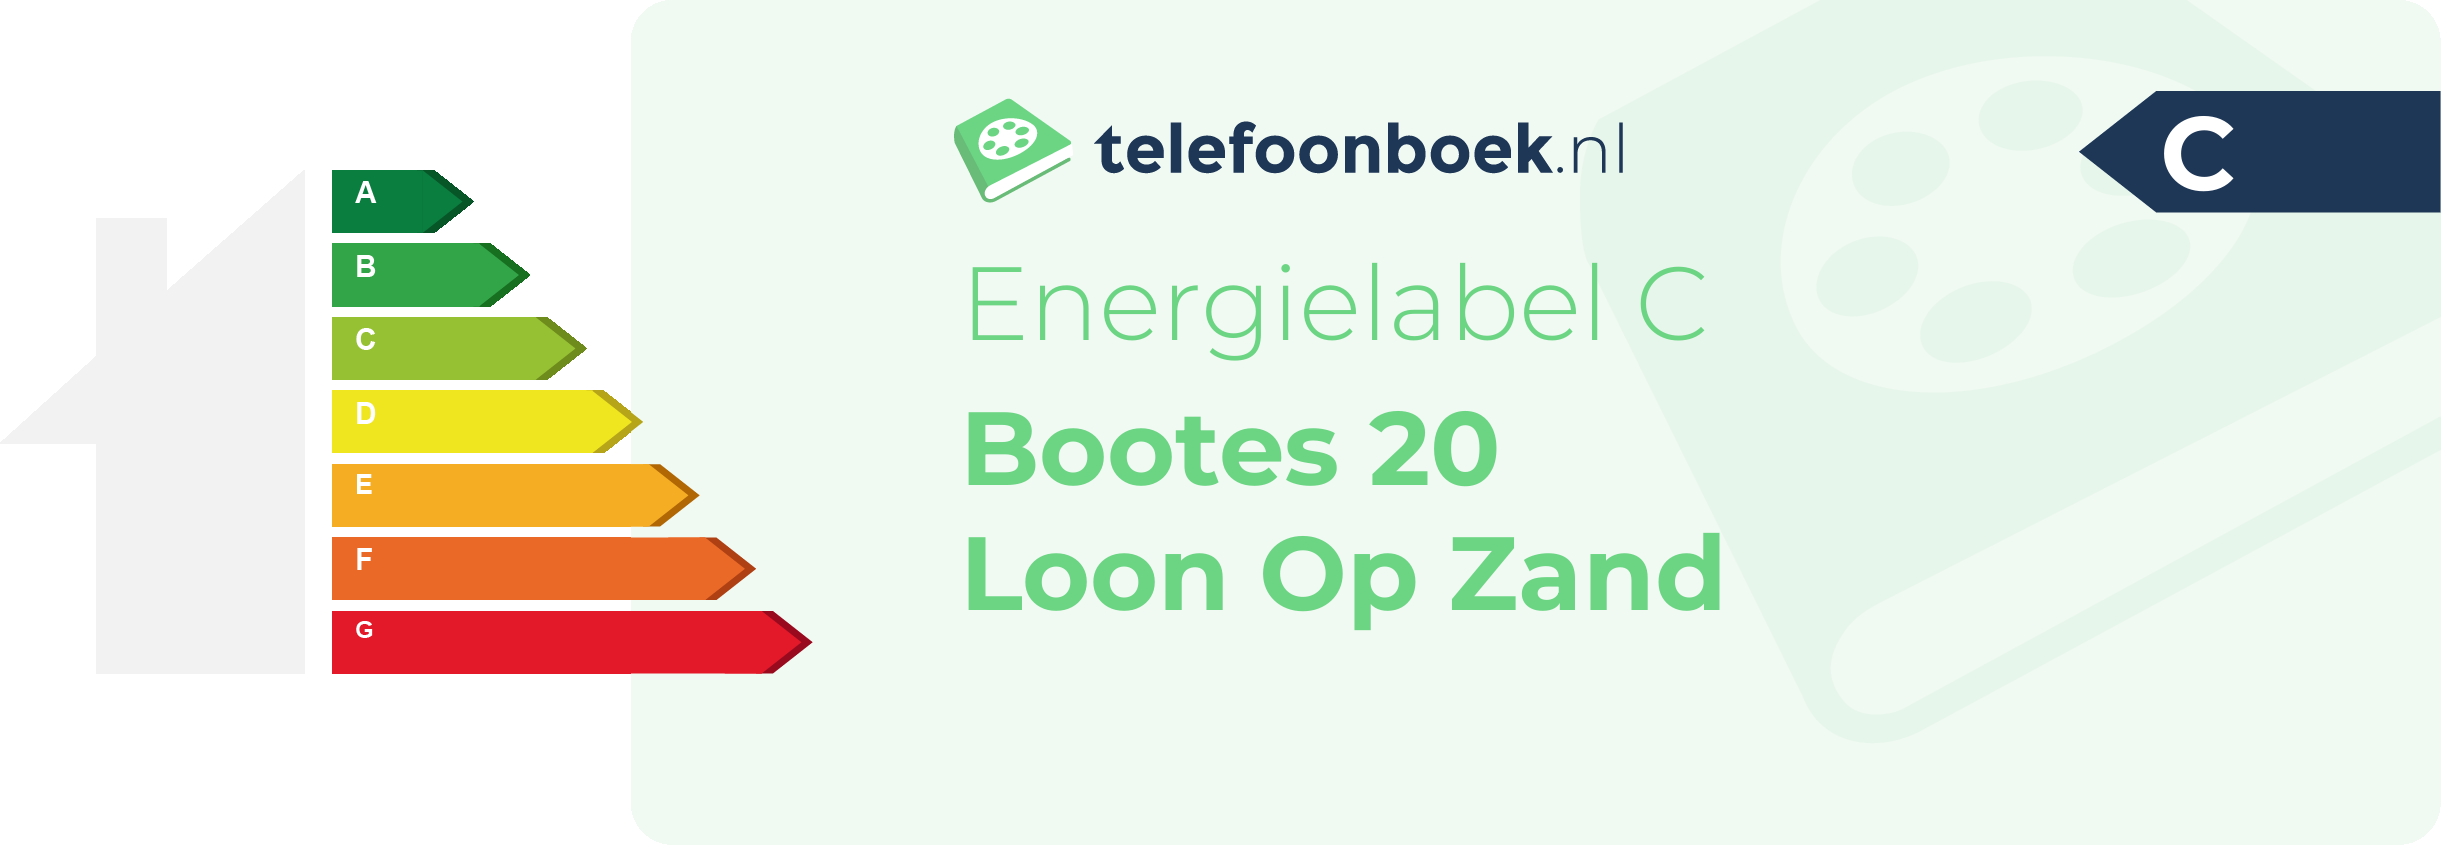 Energielabel Bootes 20 Loon Op Zand